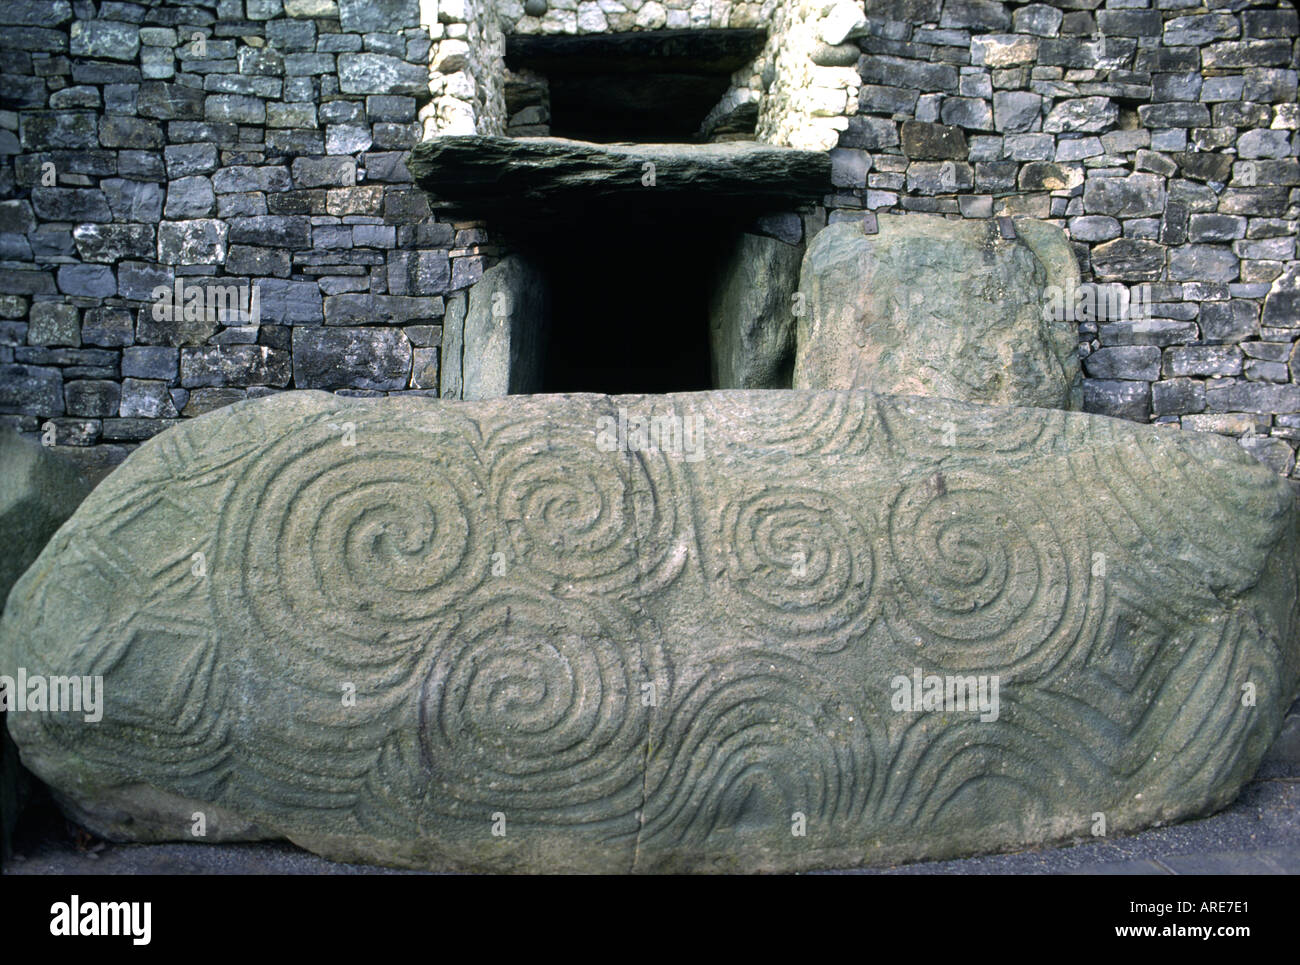 Newgrange prehistoric passage mound. County Meath, Ireland. Decorated carved spiral and triskele stone at the passage entrance. Stock Photo